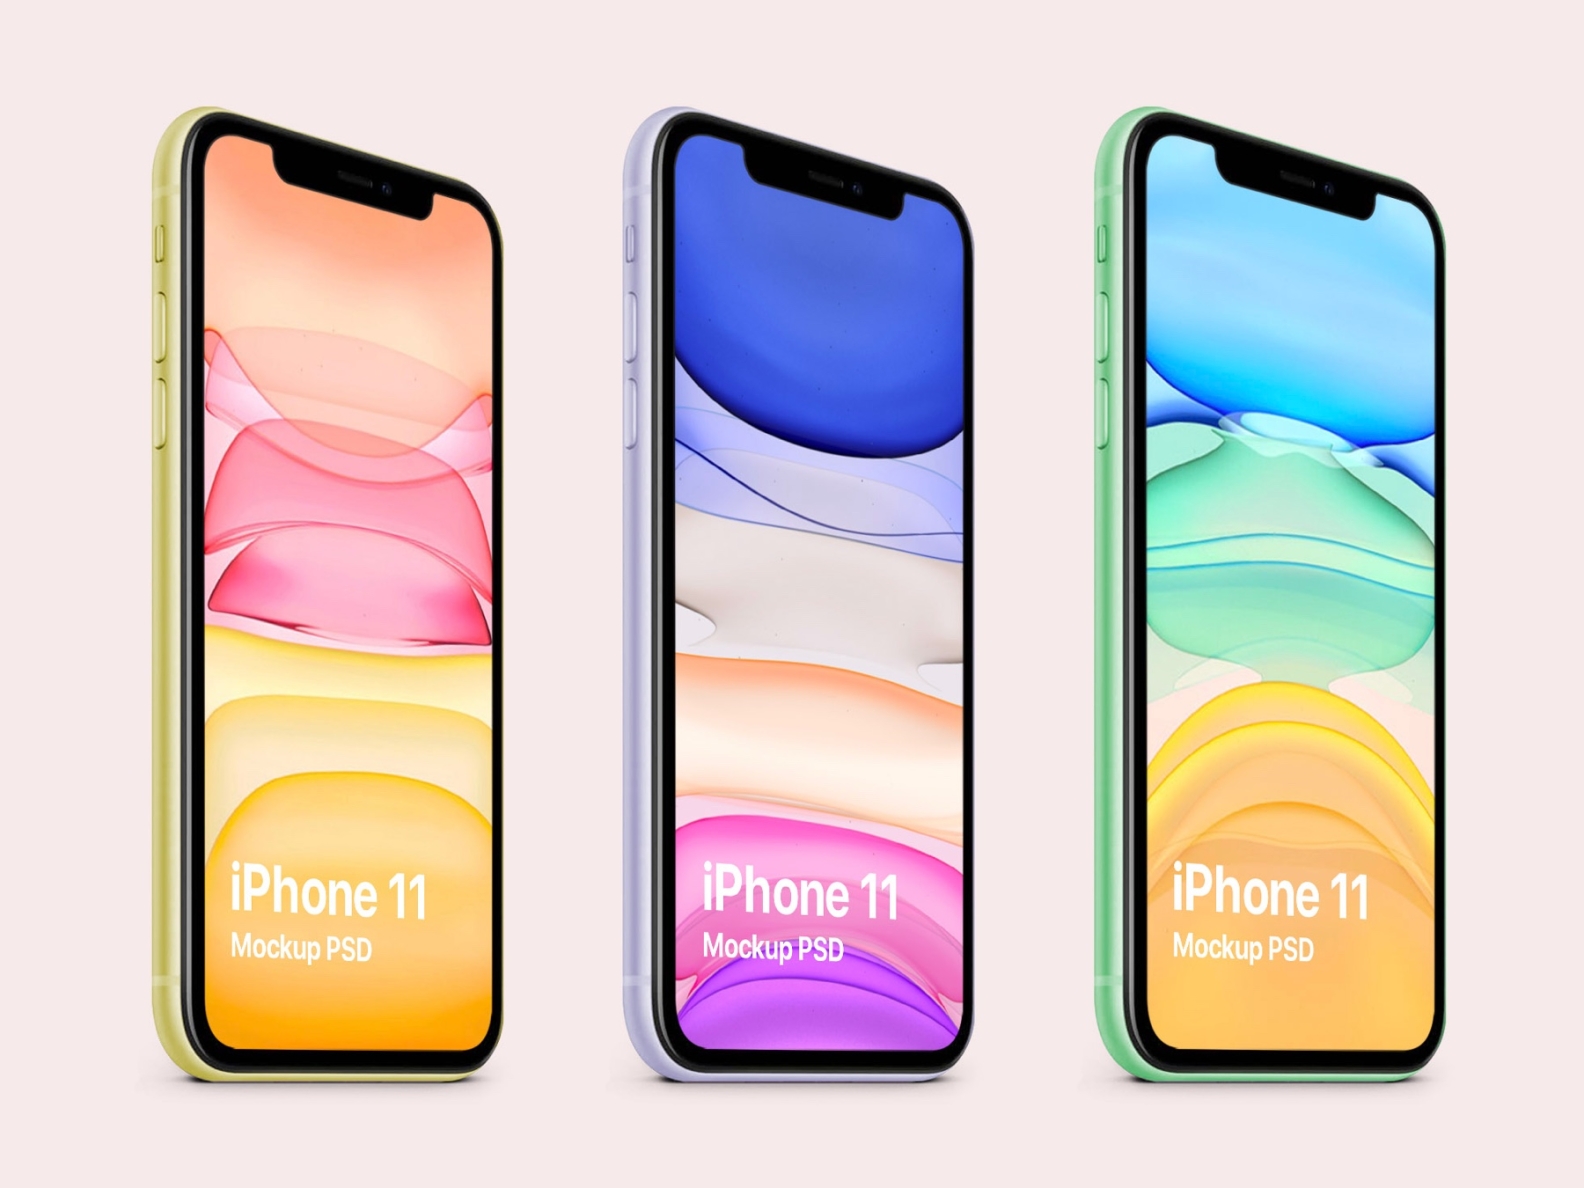 Download iPhone 11 mockup psd freebie by Pegakit on Dribbble PSD Mockup Templates